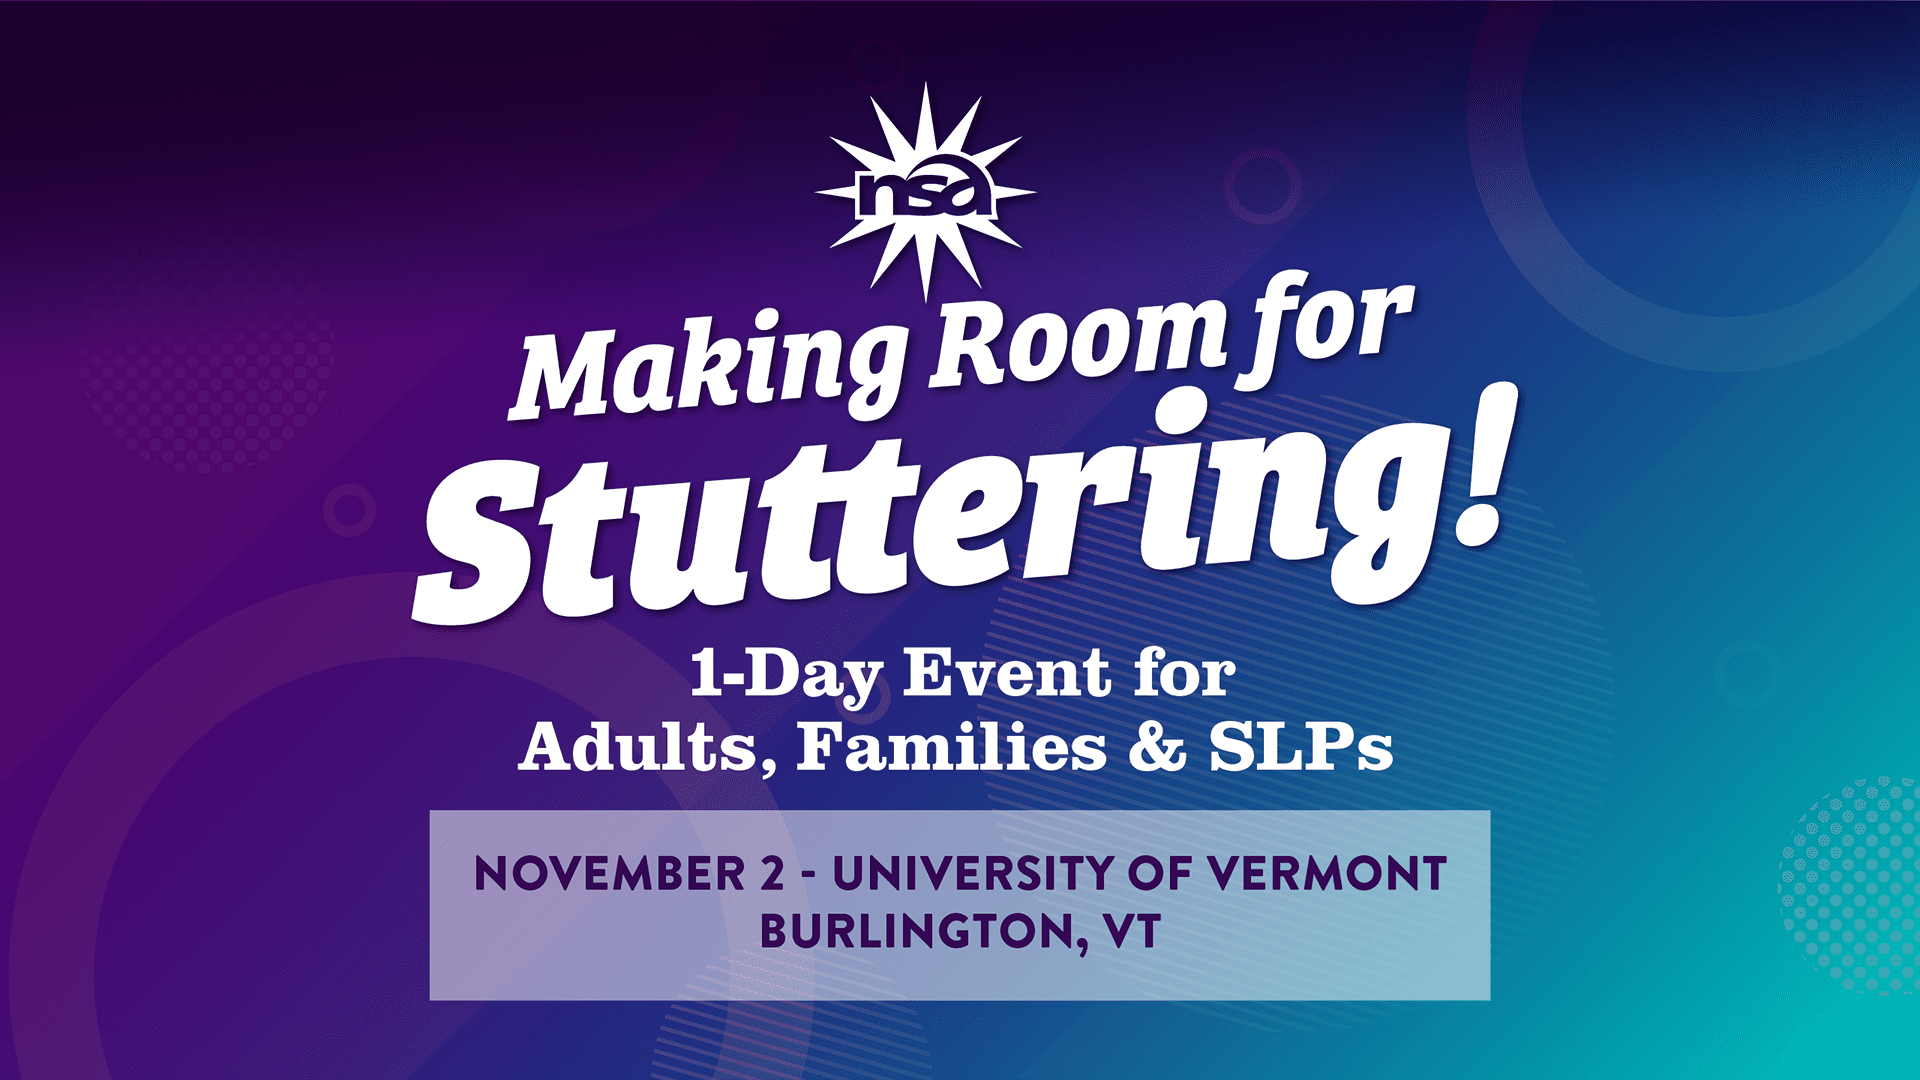 A banner for the National Stuttering Association (NSA) event titled "Making Room for Stuttering!" The 1-day event is for adults, families, and SLPs, scheduled for November 2 at the University of Vermont in Burlington, VT.